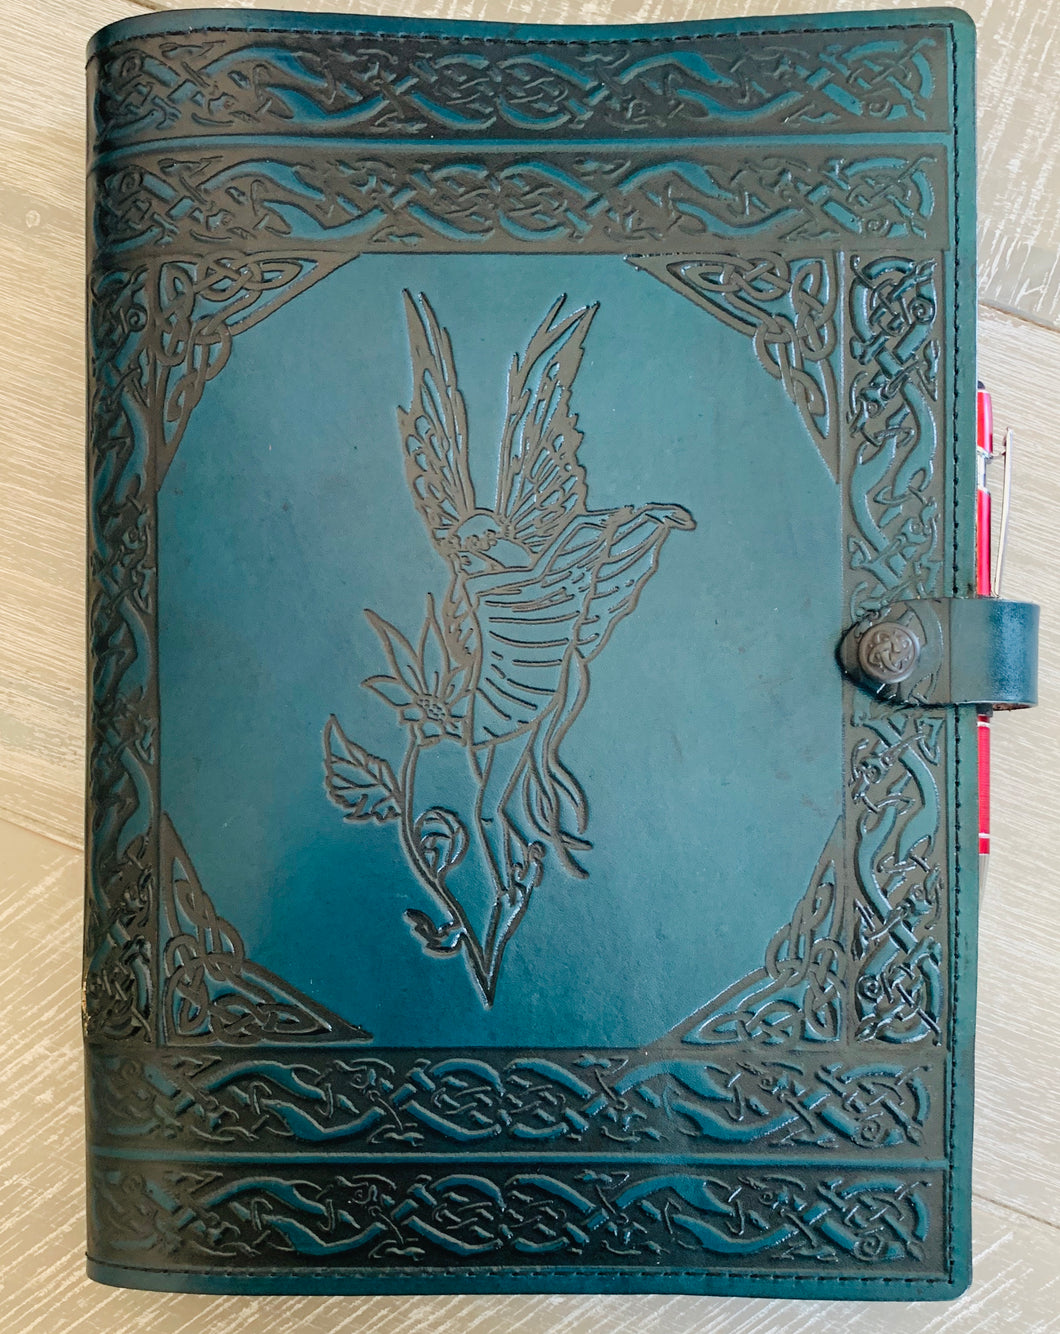 A4 Leather Journal Cover - Celtic Shy Fairy - Green